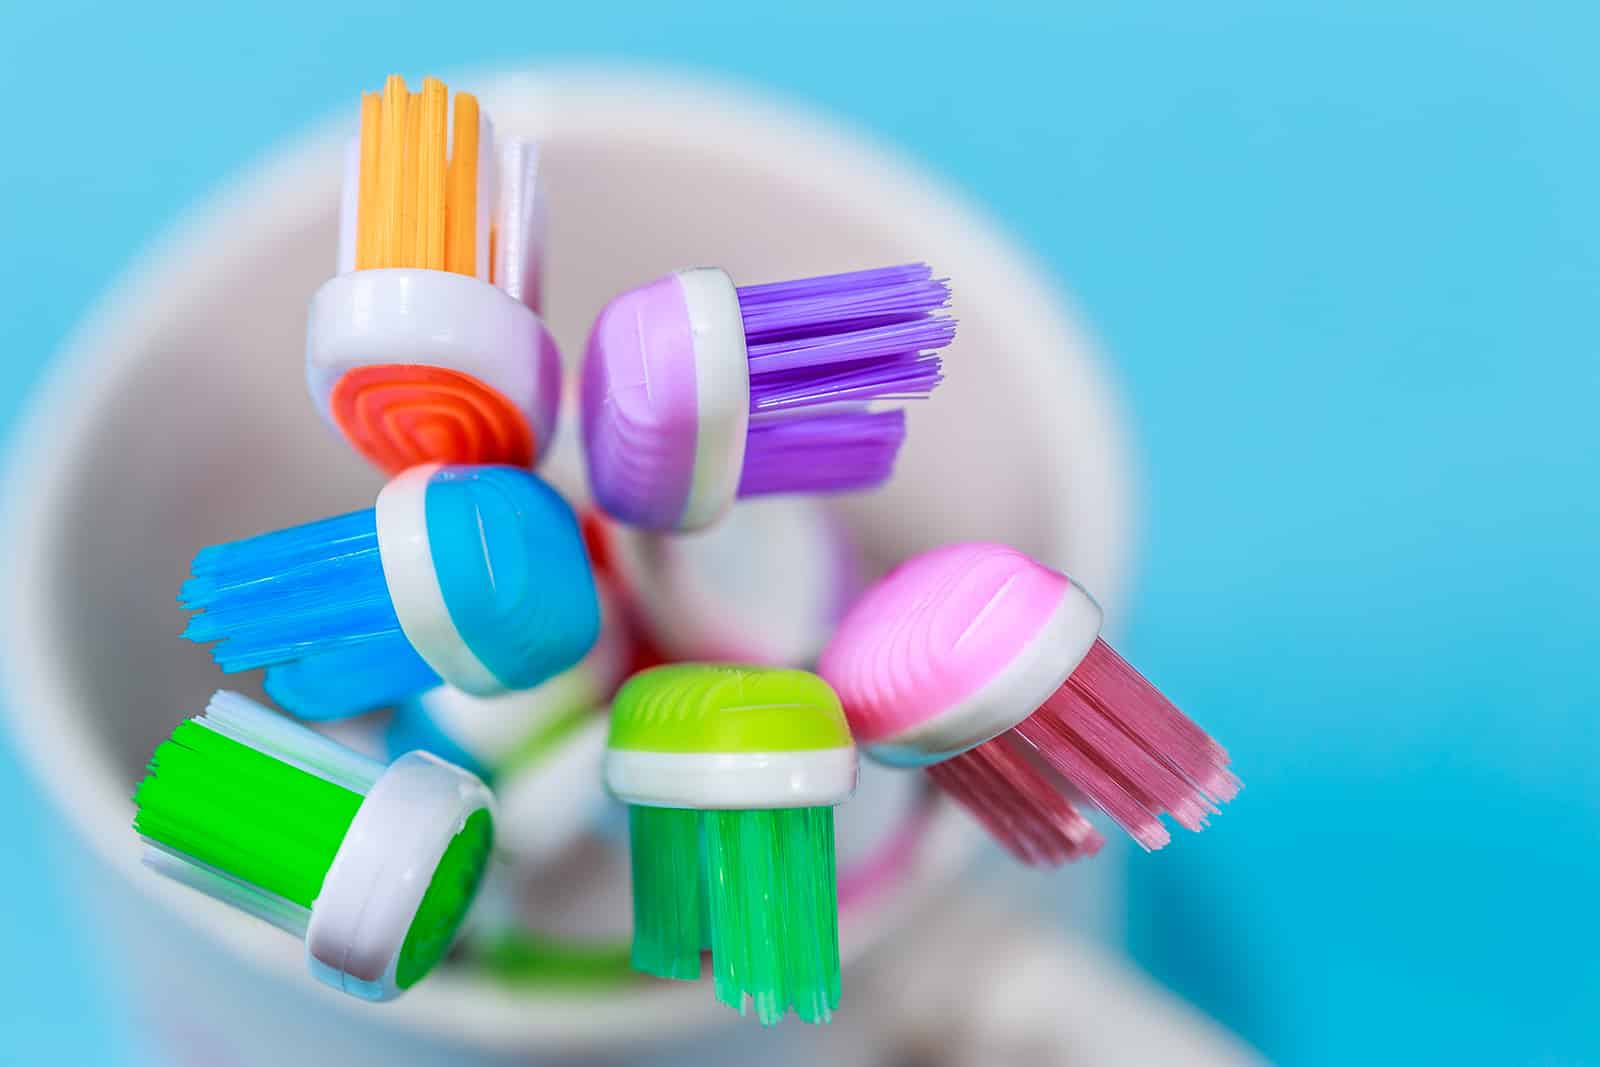 Ask Your Edna Dentist: How to Choose the Best Toothbrush